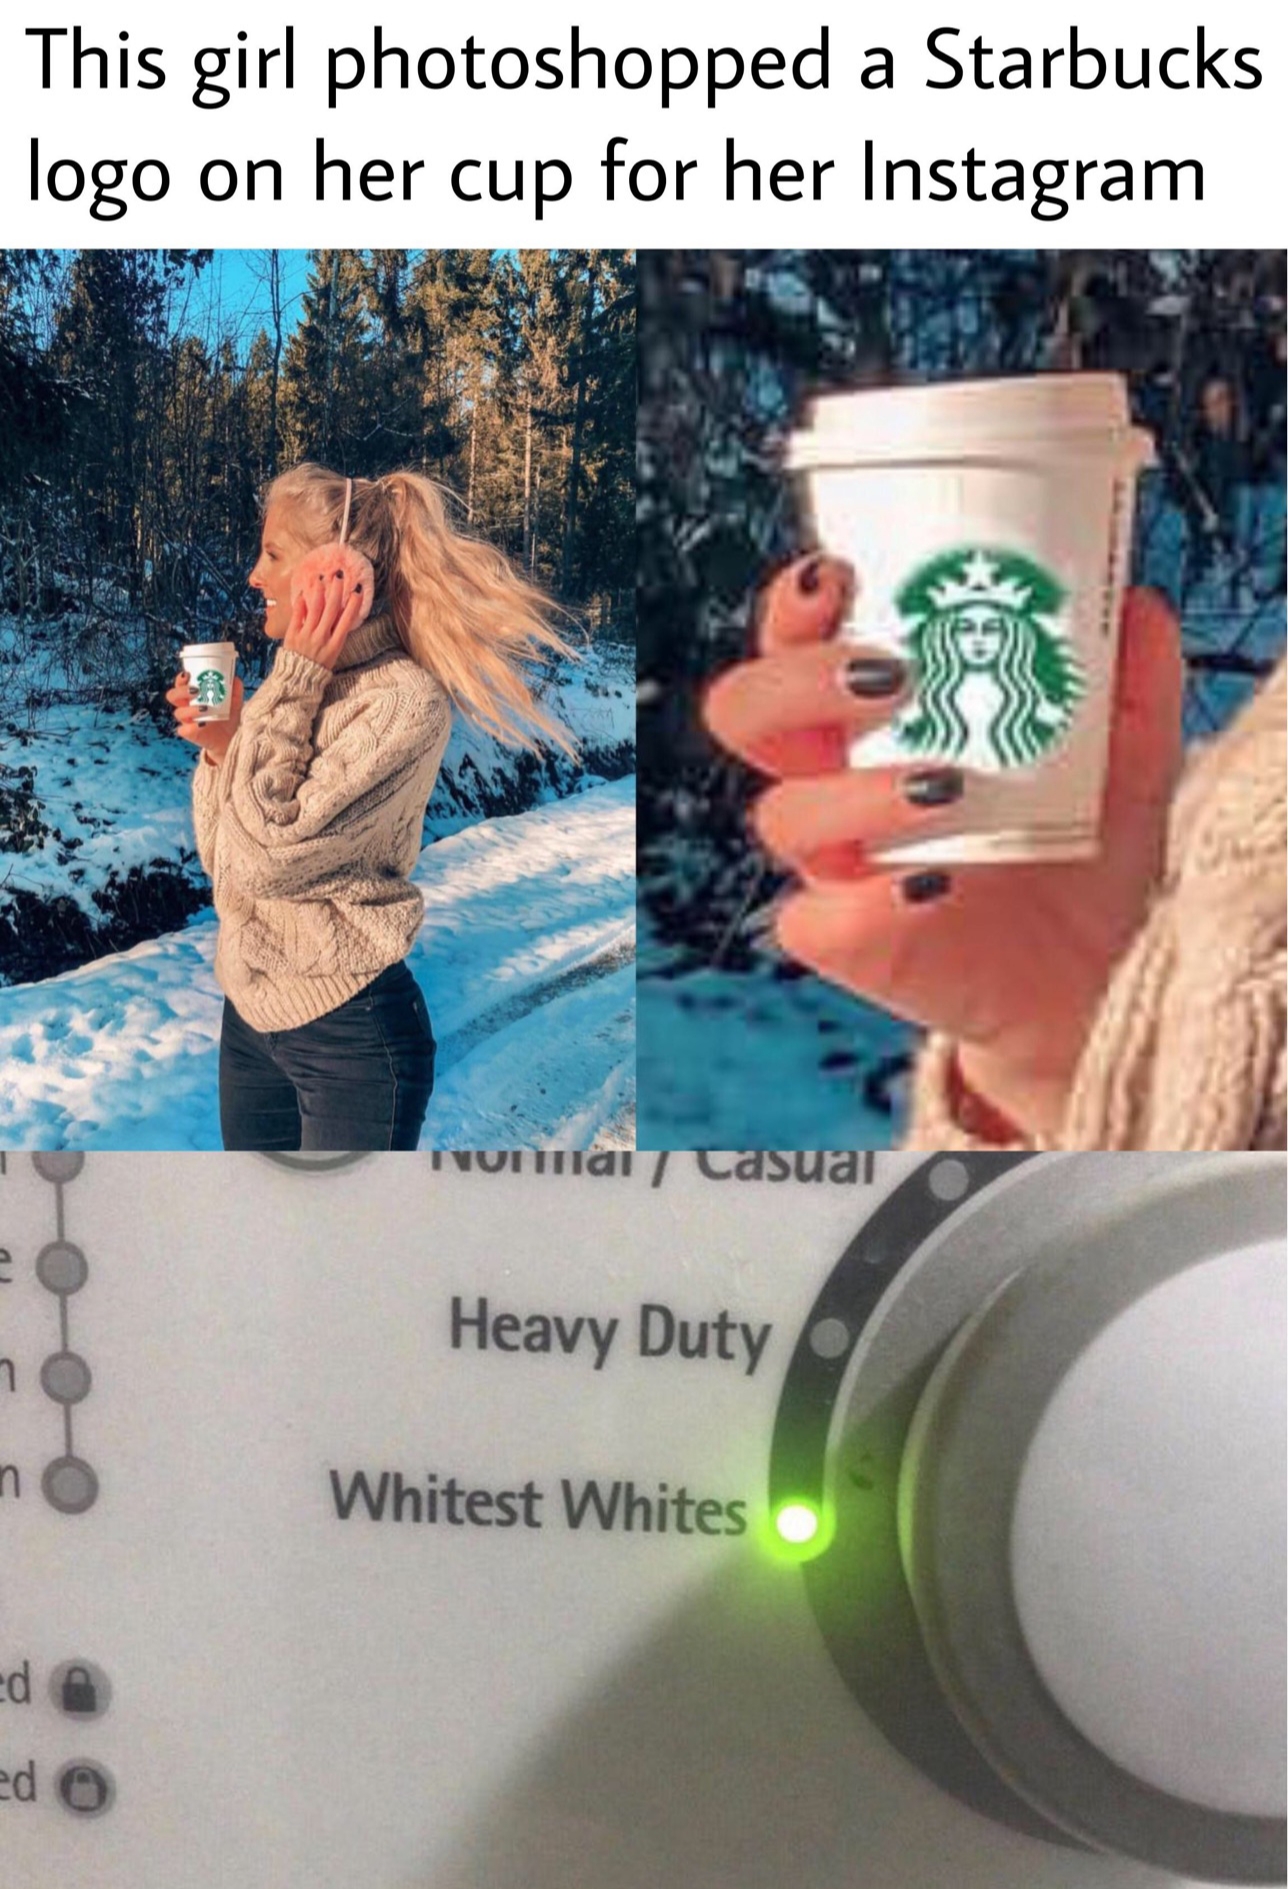 water - This girl photoshopped a Starbucks logo on her cup for her Instagram rundi Casual Heavy Duty Whitest Whites d edo